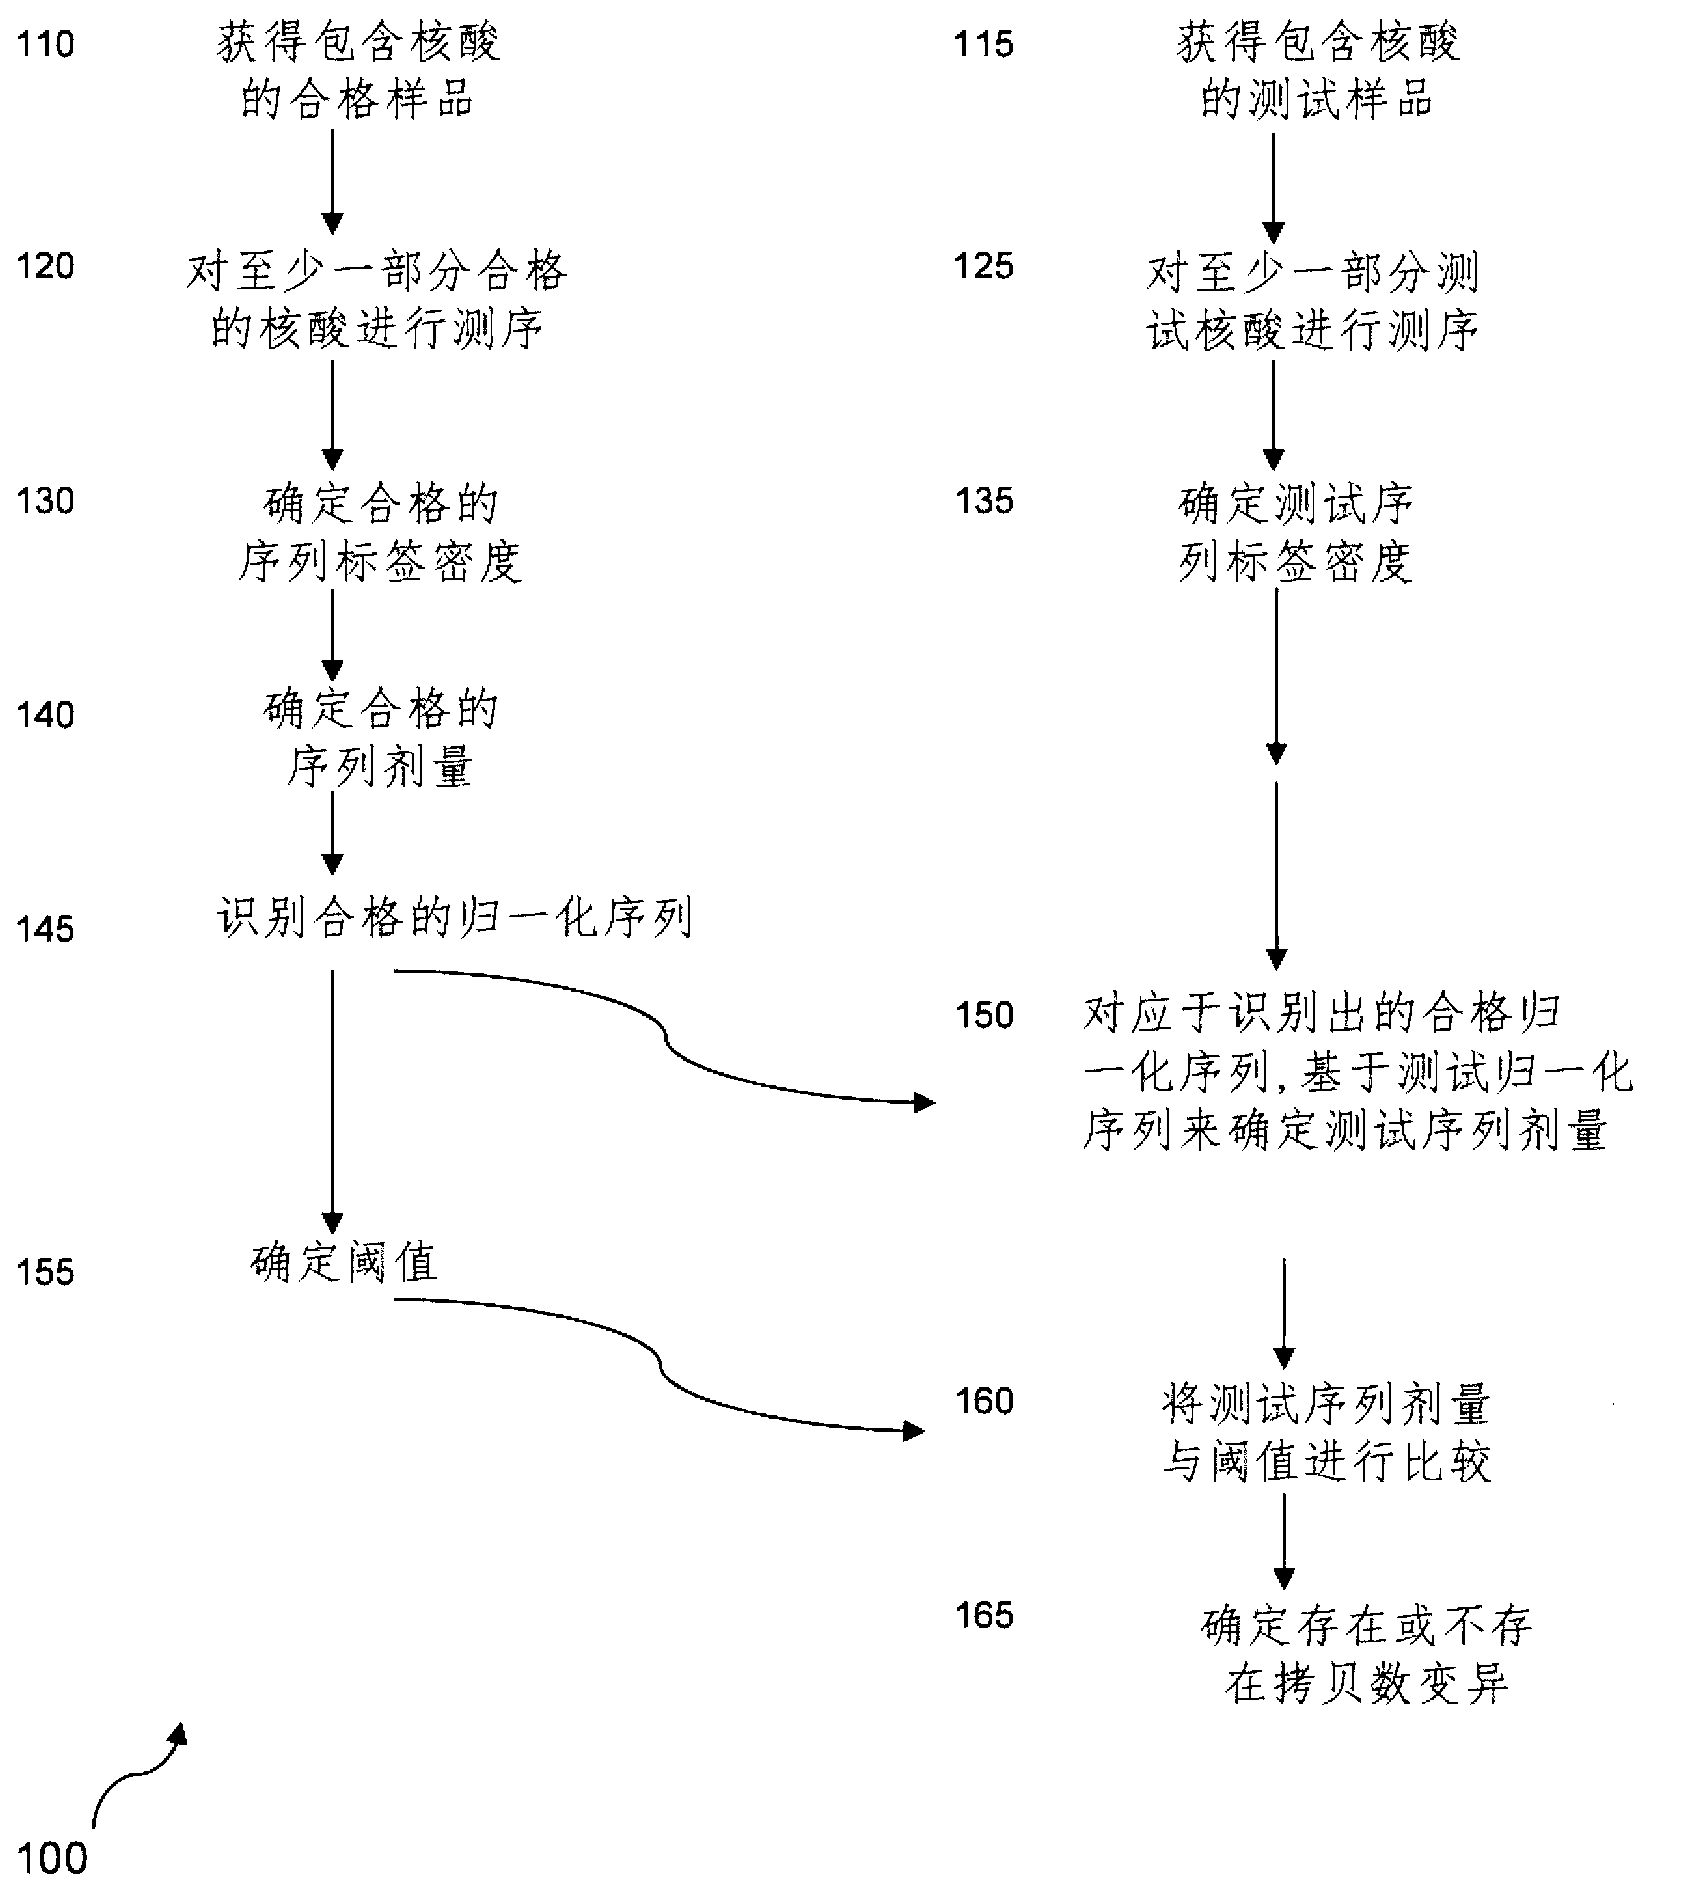 Method for determining the presence or absence of different aneuploidies in a sample